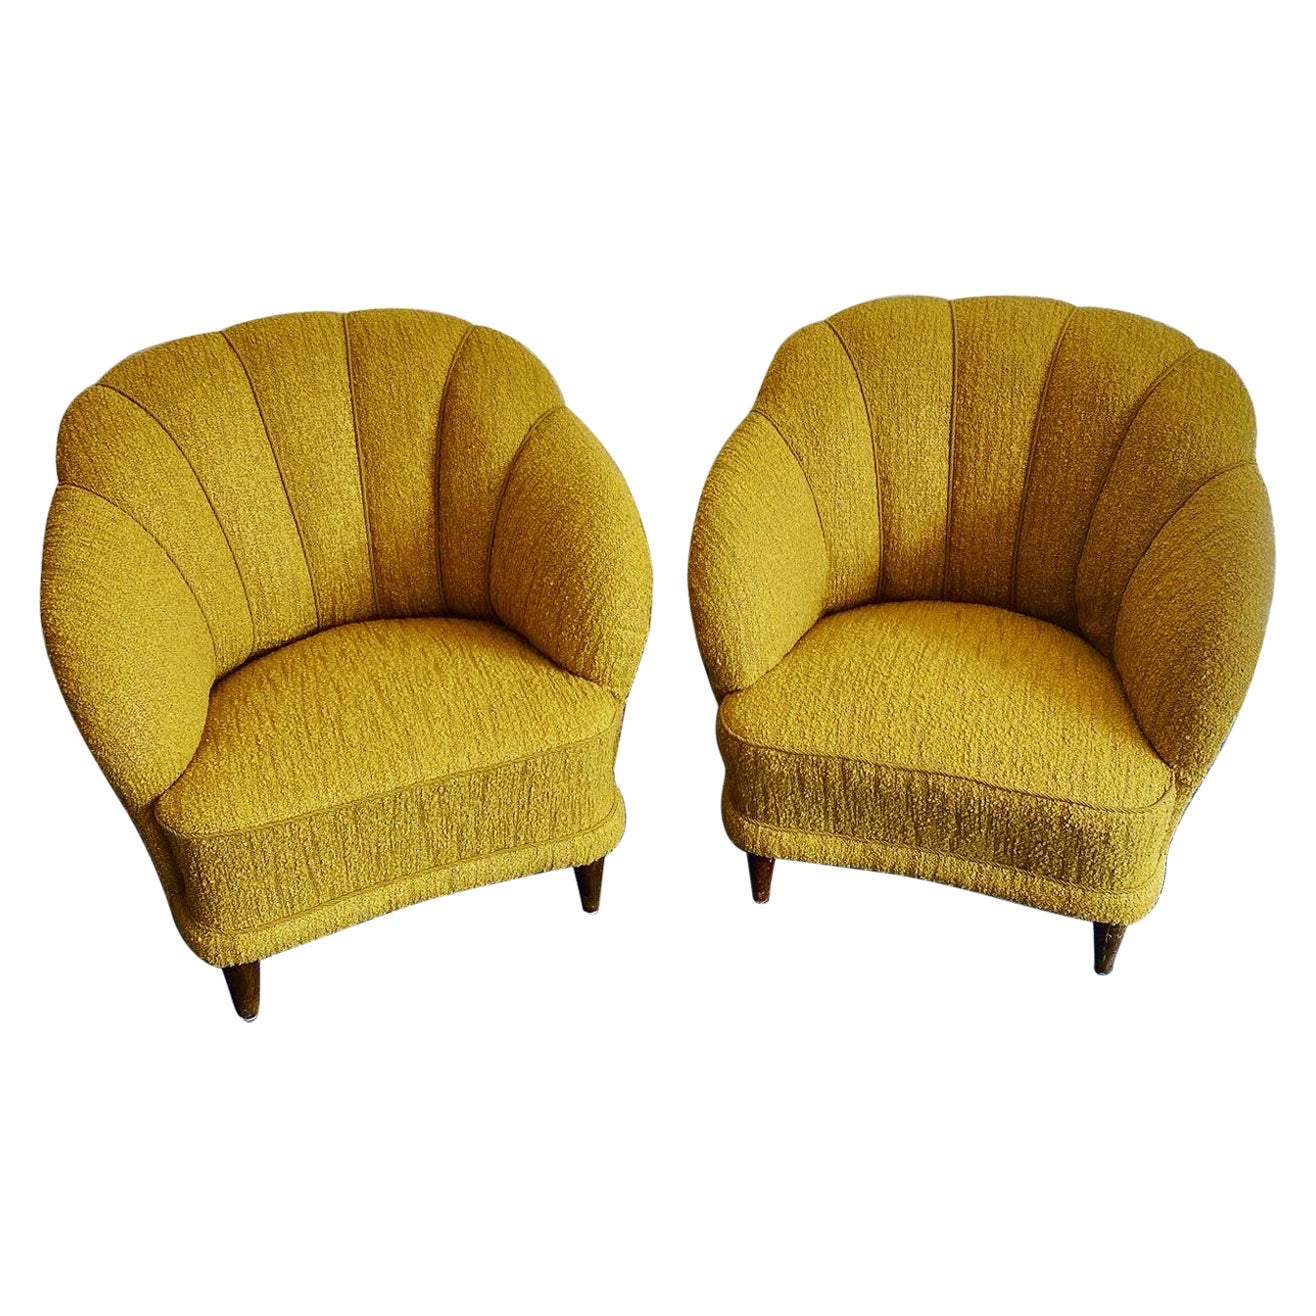 Set of 2 Club Chairs Attributed to Carl-Johan Bohman, Finland For Sale